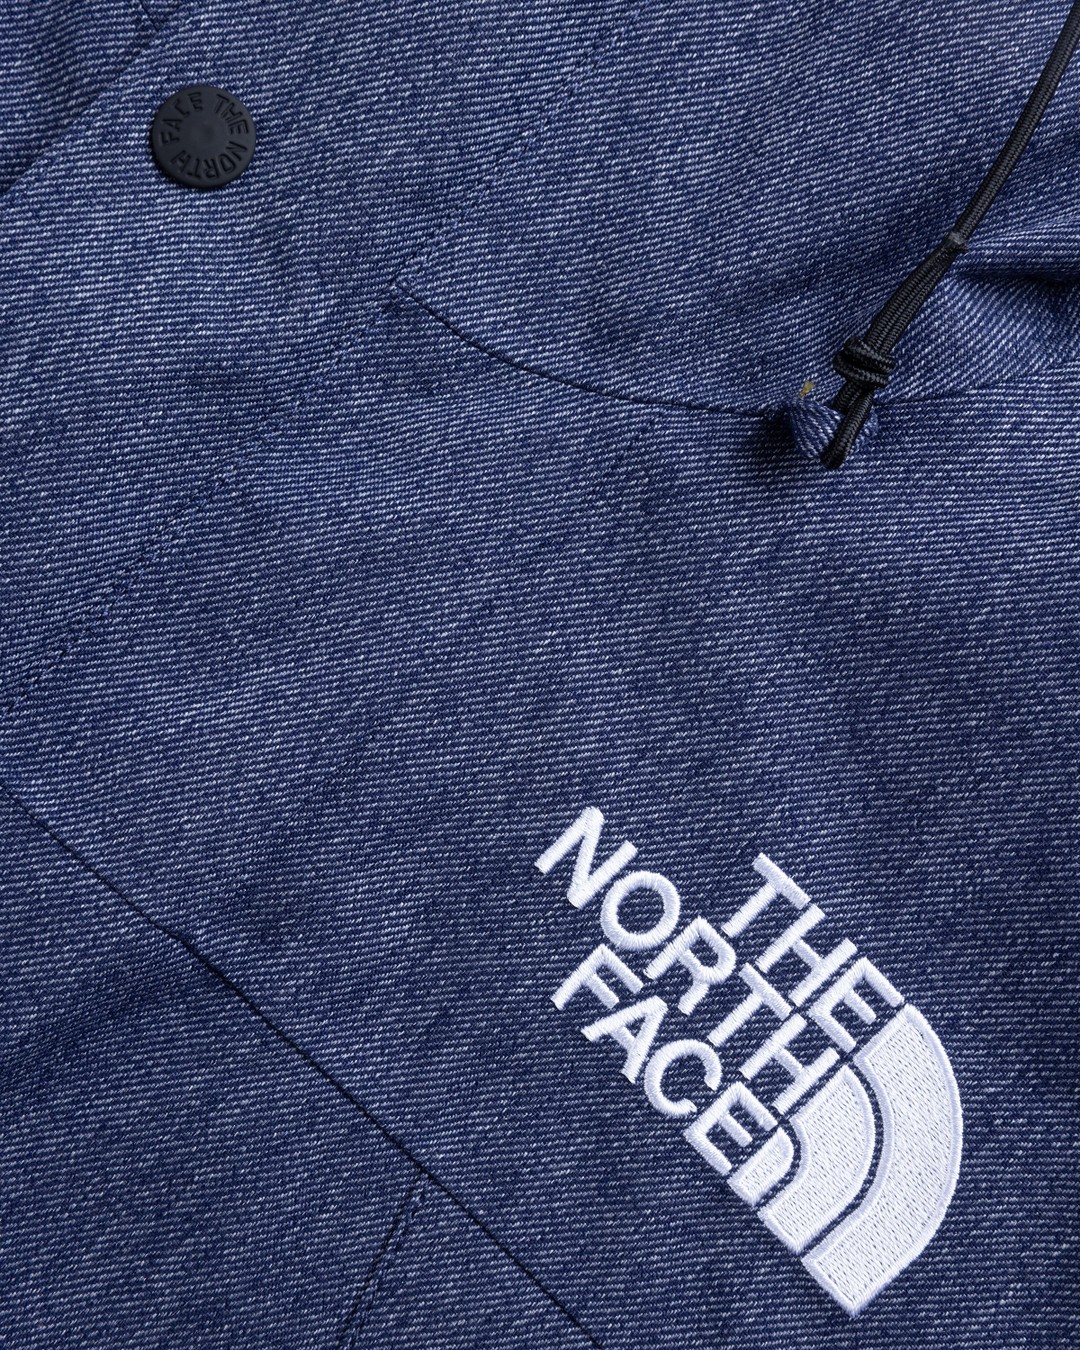 The North Face – GORE-TEX Mountain Jacket Denim Blue/TNF Black - Outerwear - Blue - Image 7